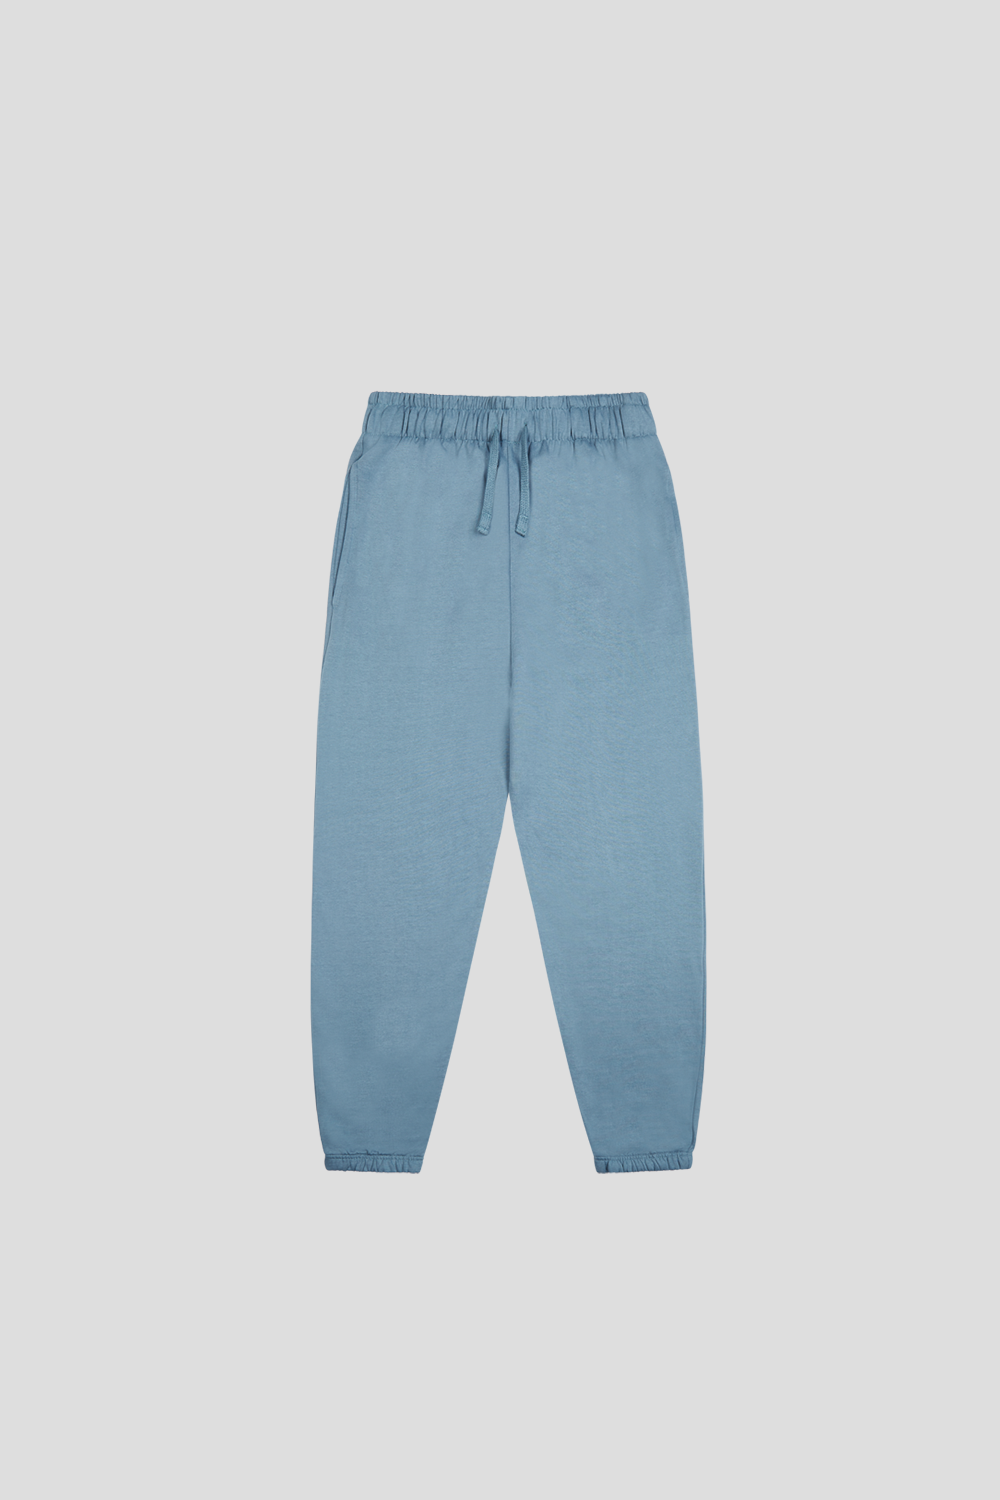 Industry Elasticated Cuff Jogger Blue